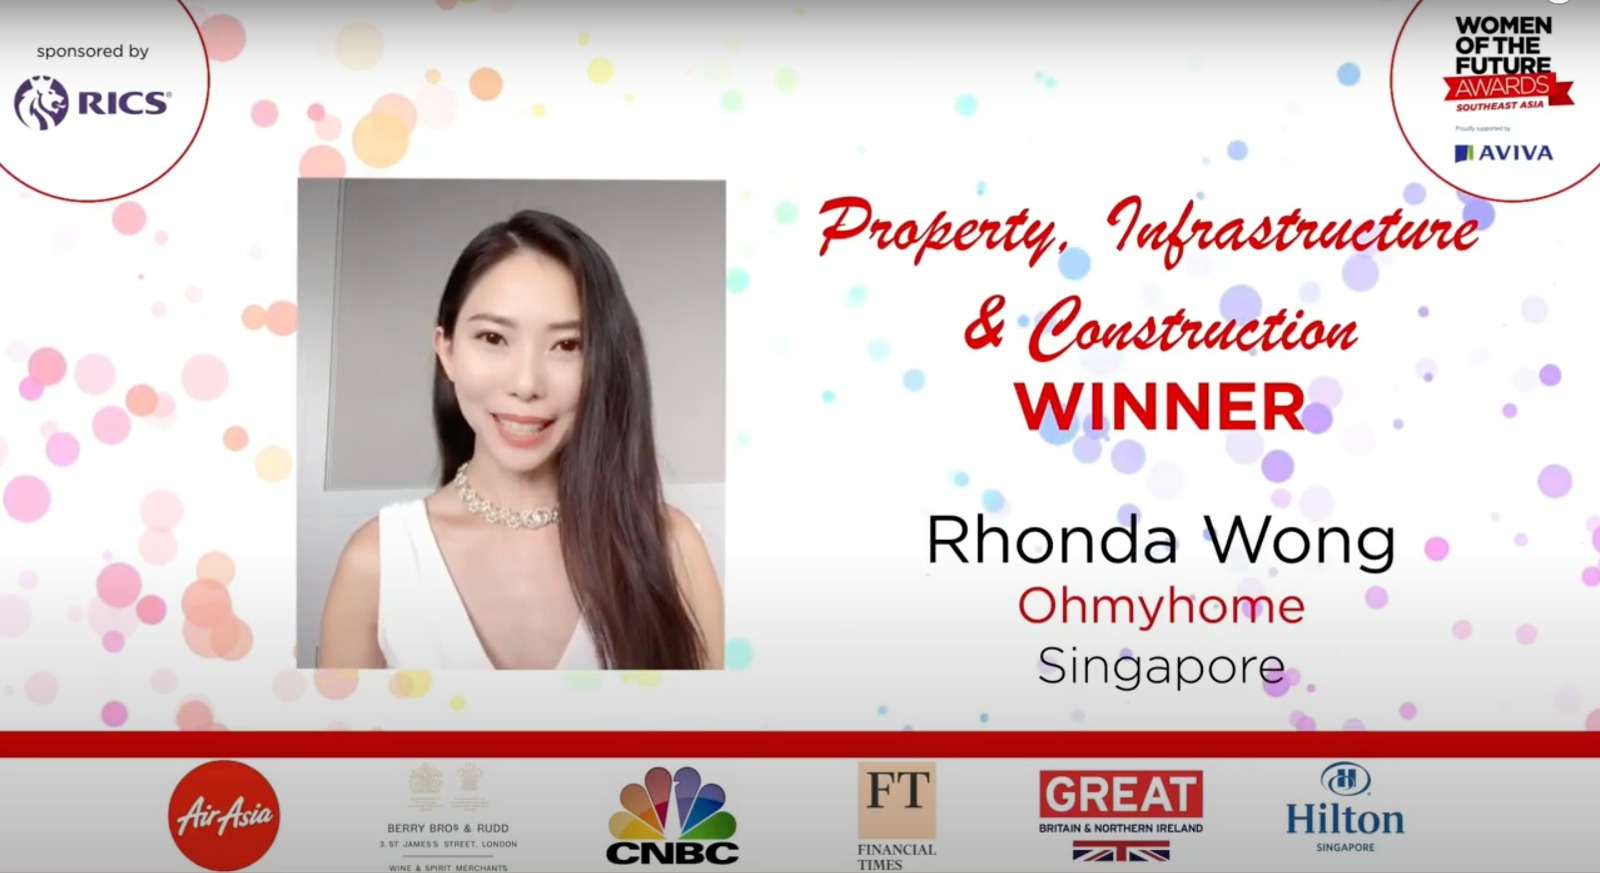 ohmyhome-buy-sell-rent-property-app-singapore-women-of-the-future